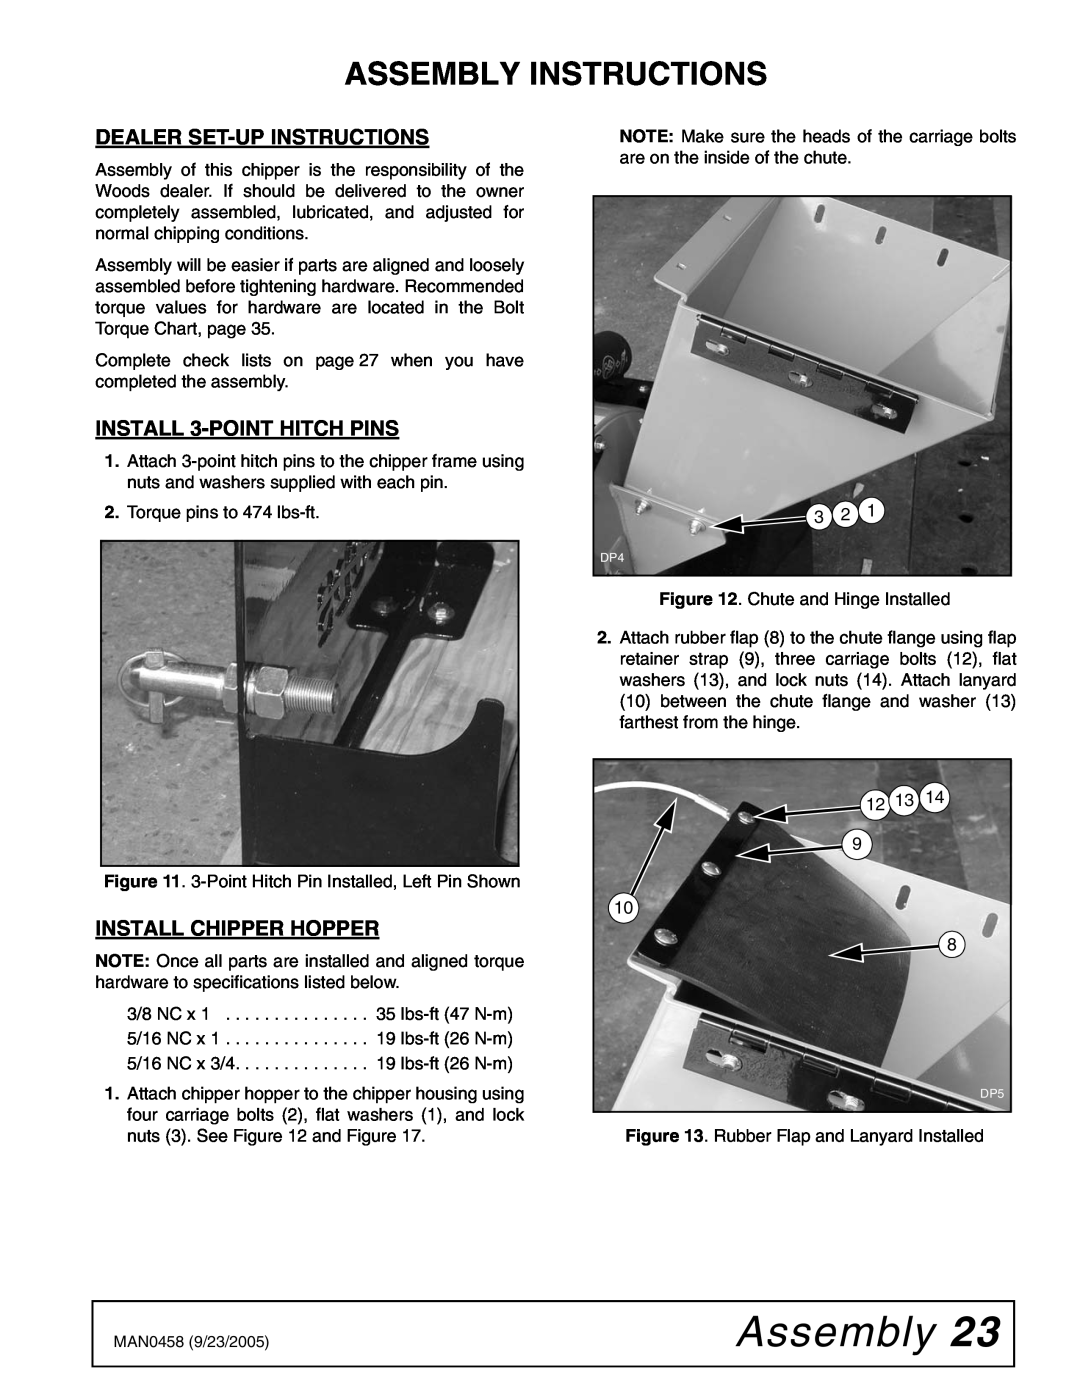 Woods Equipment TCH4500 manual Assembly Instructions, Dealer Set-Up Instructions, INSTALL 3-POINT HITCH PINS 